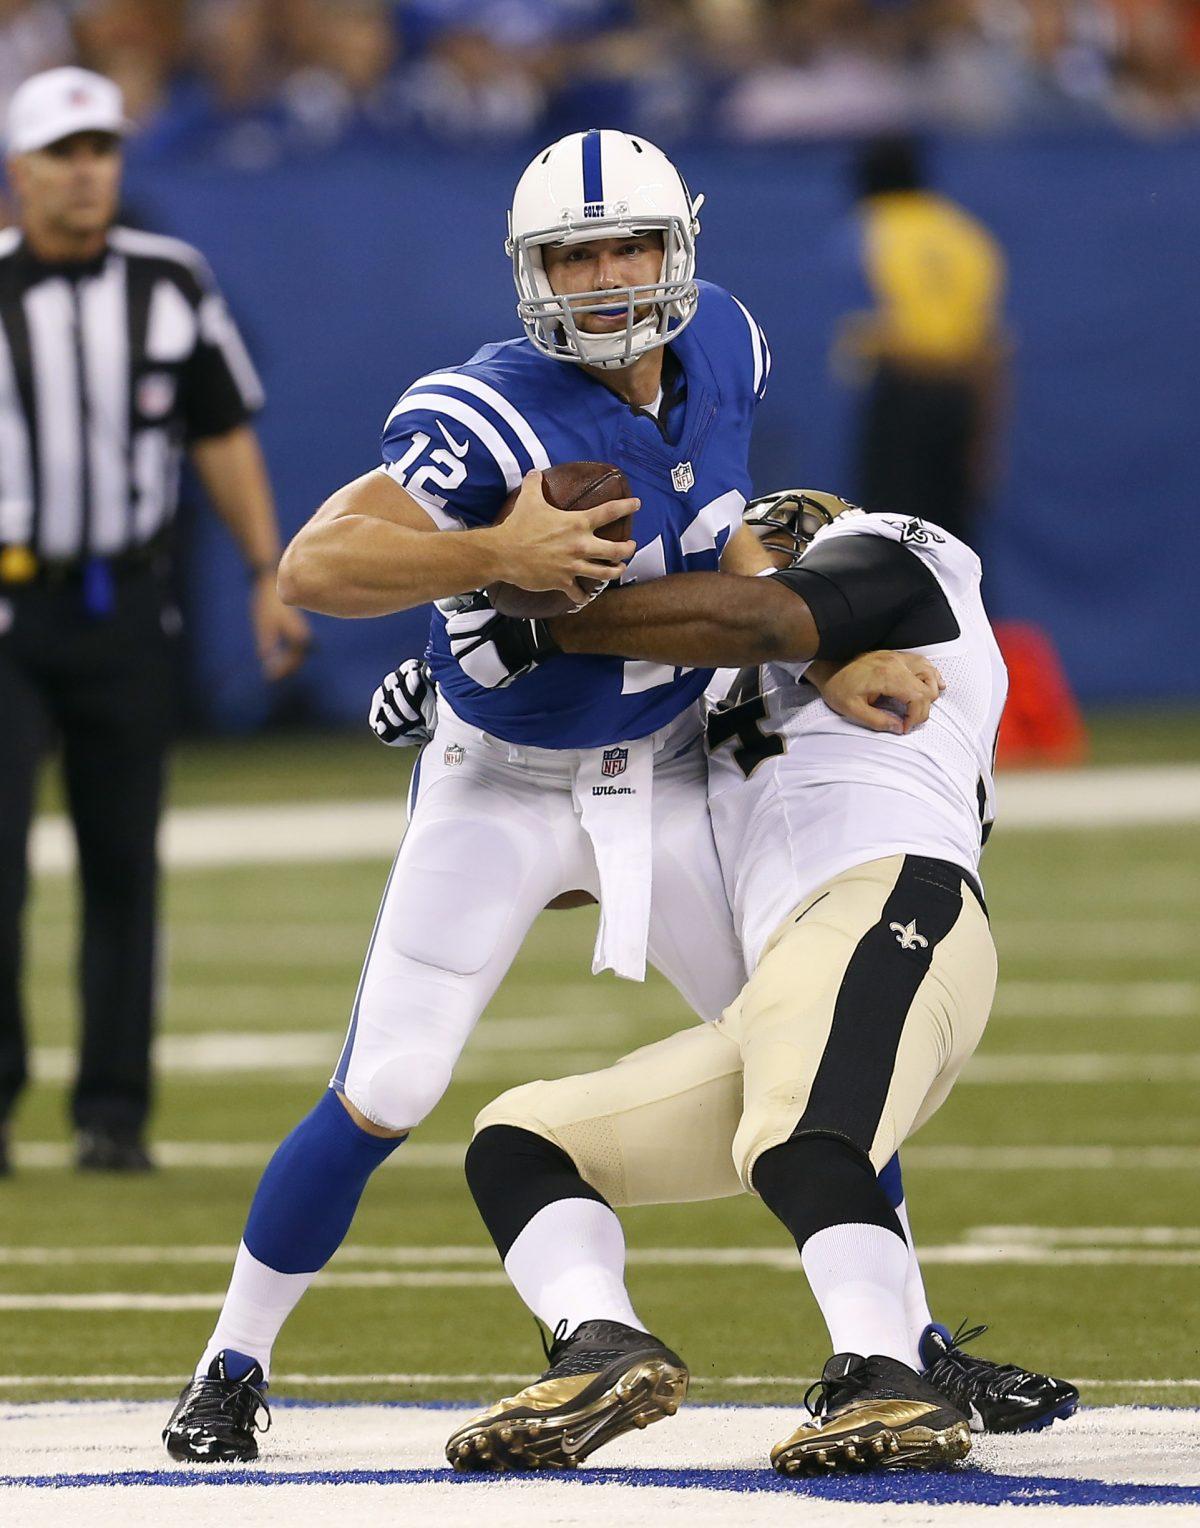 Indianapolis Colts quarterback Andrew Luck (L) is hit by New Orleans Saints defensive end Cameron Jordan during the first half of an NFL preseason football game in Indianapolis, on Aug. 23, 2014. (Sam Riche/AP Photo)